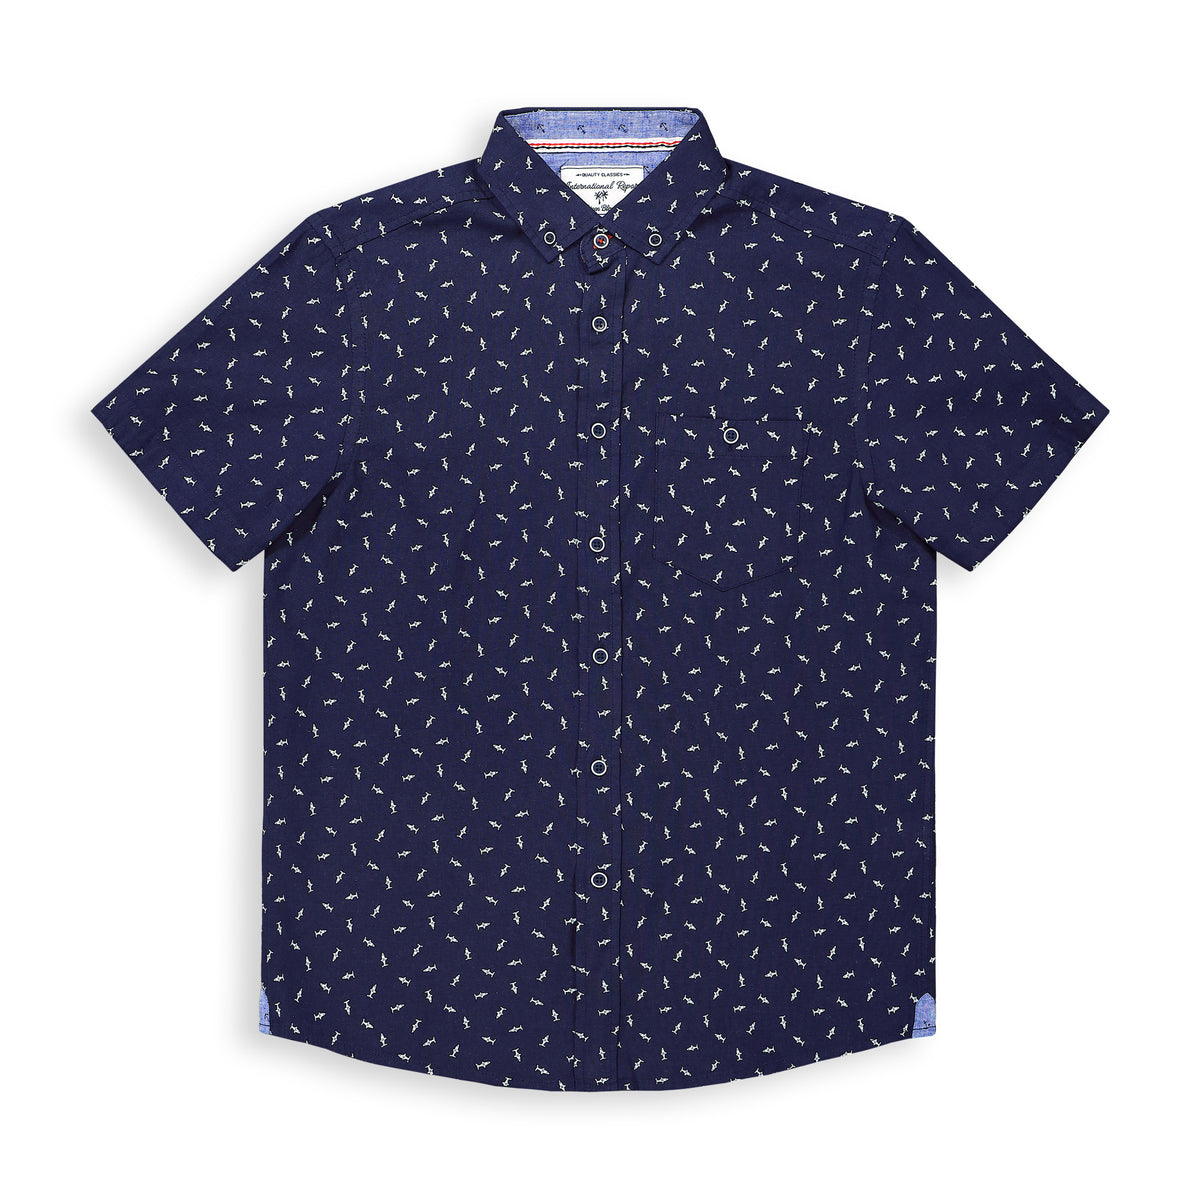 Front View of Short Sleeve Linen Blend Shirt with Shark Print in Navy